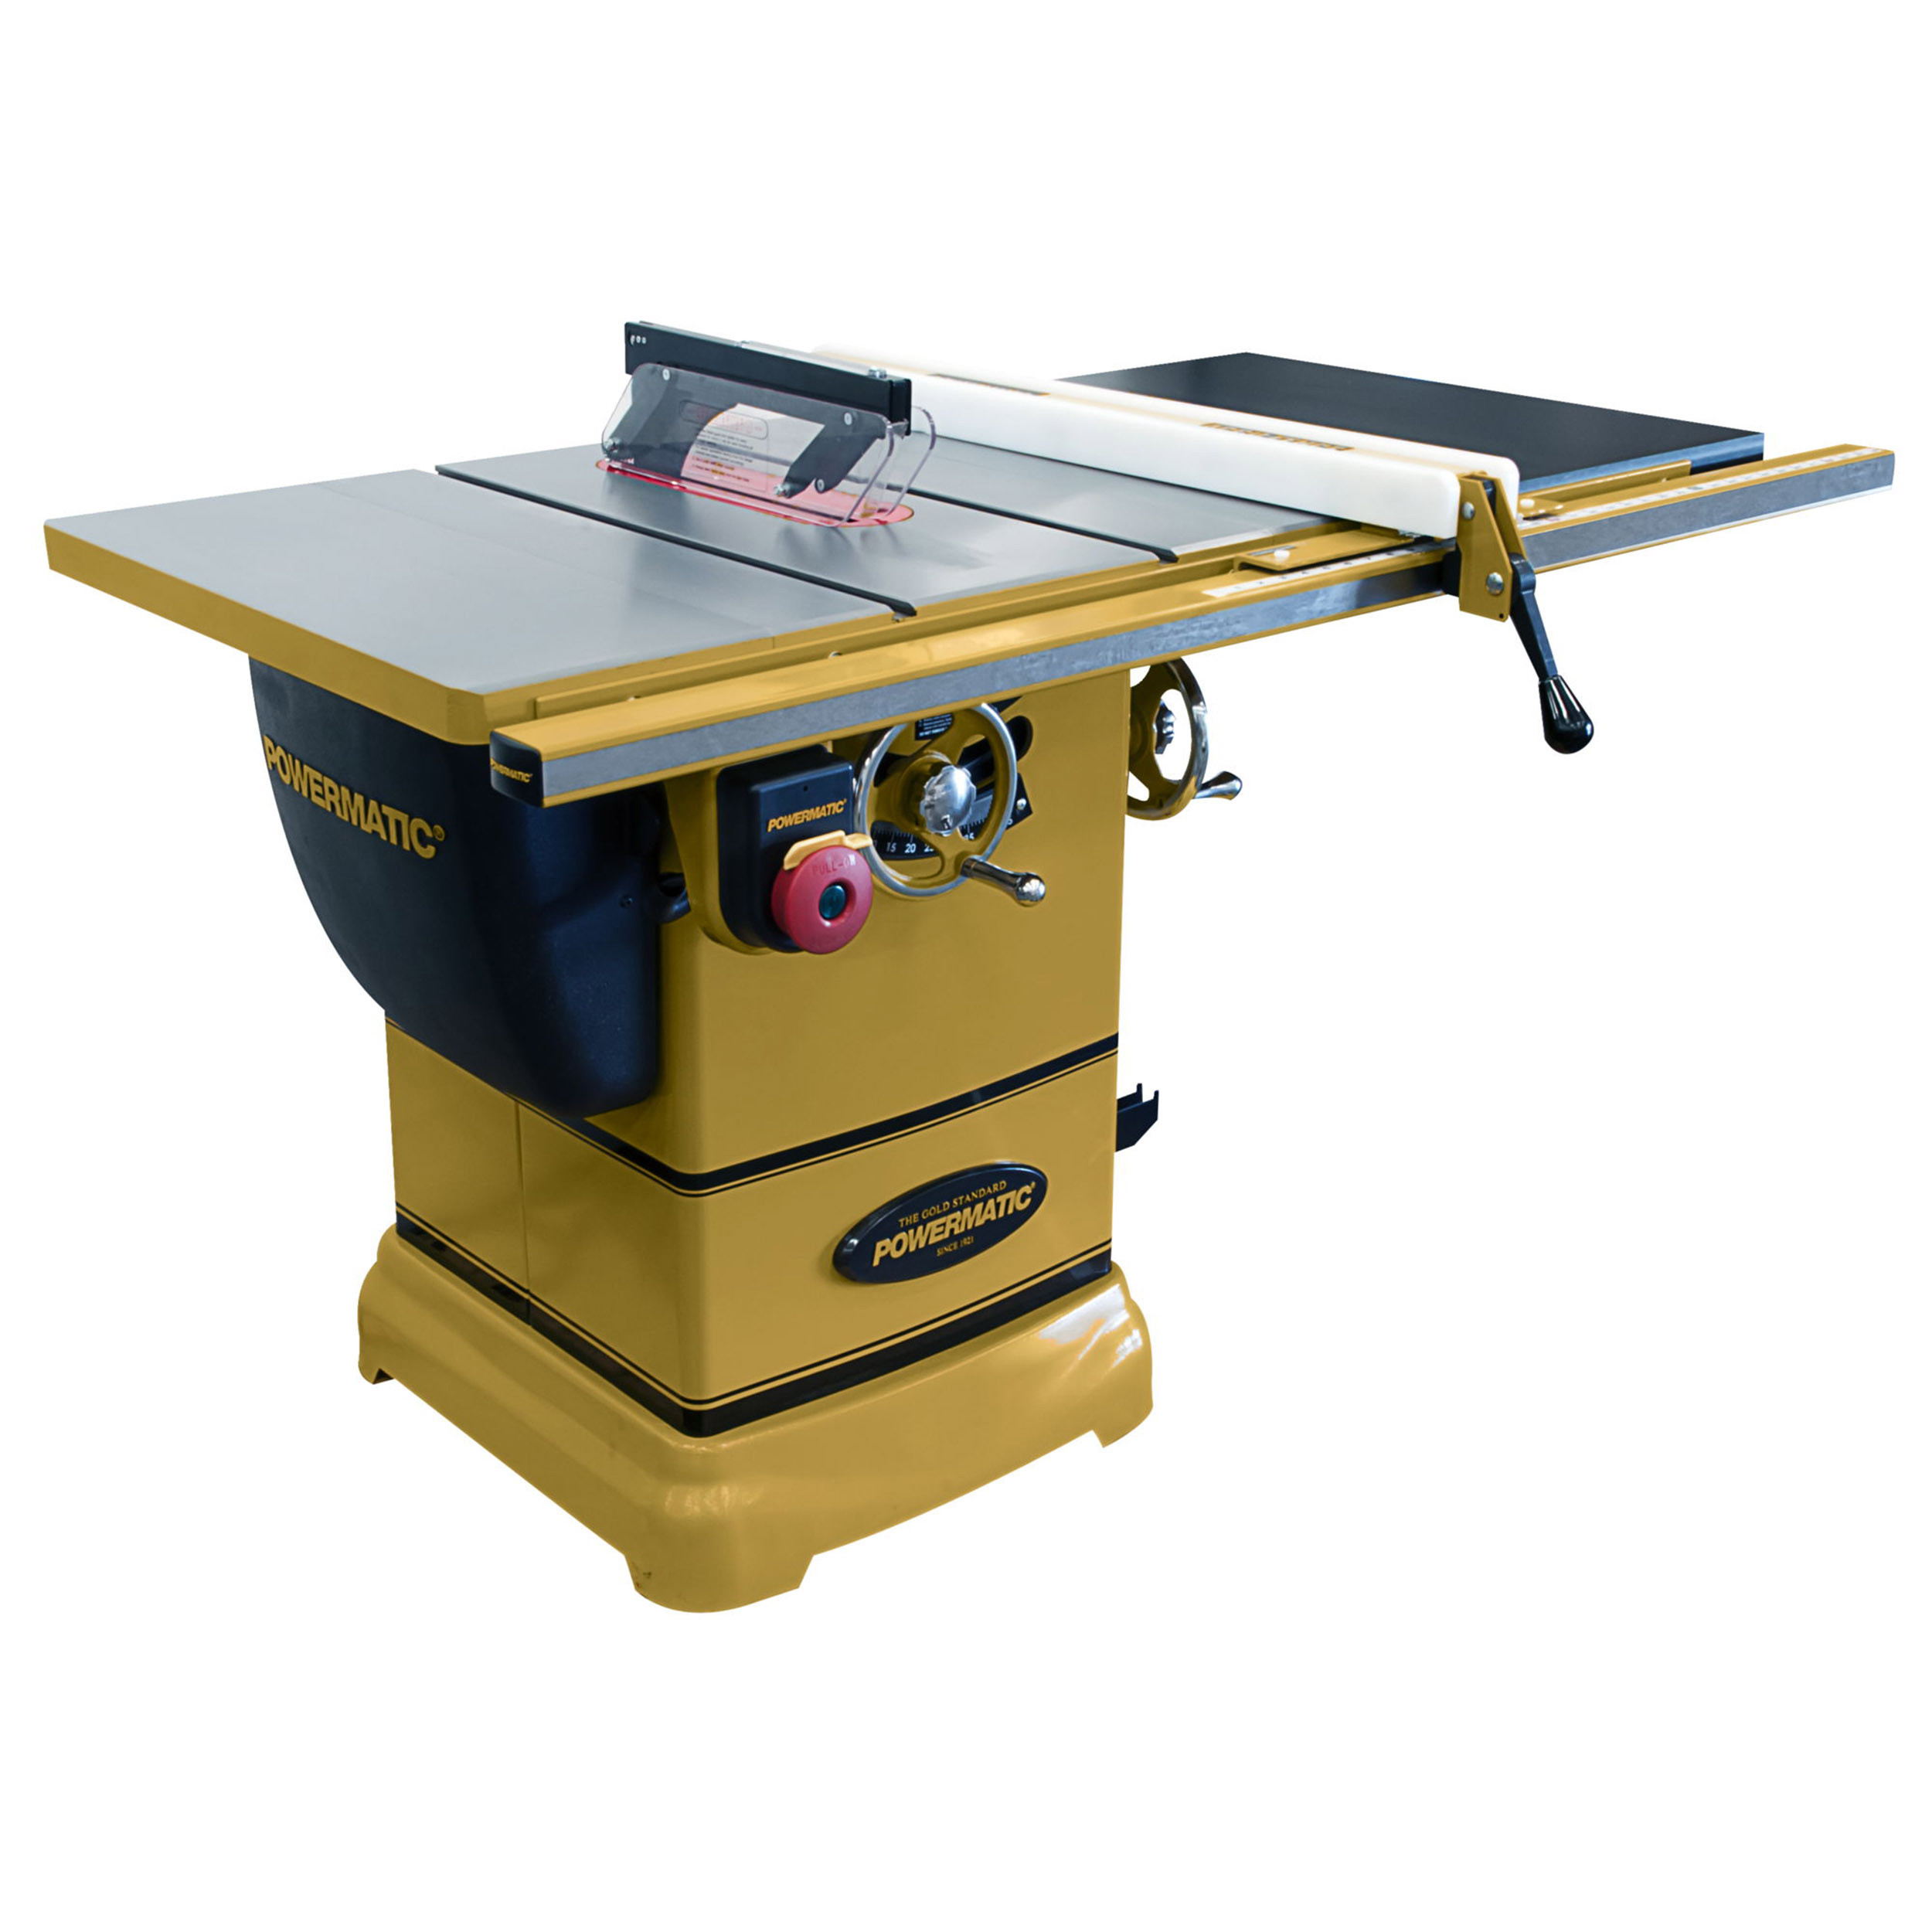 Pm 1000 Table Saw, 1 - 3 / 4 Hp, 1 Ph, 30" Accu - Fence System